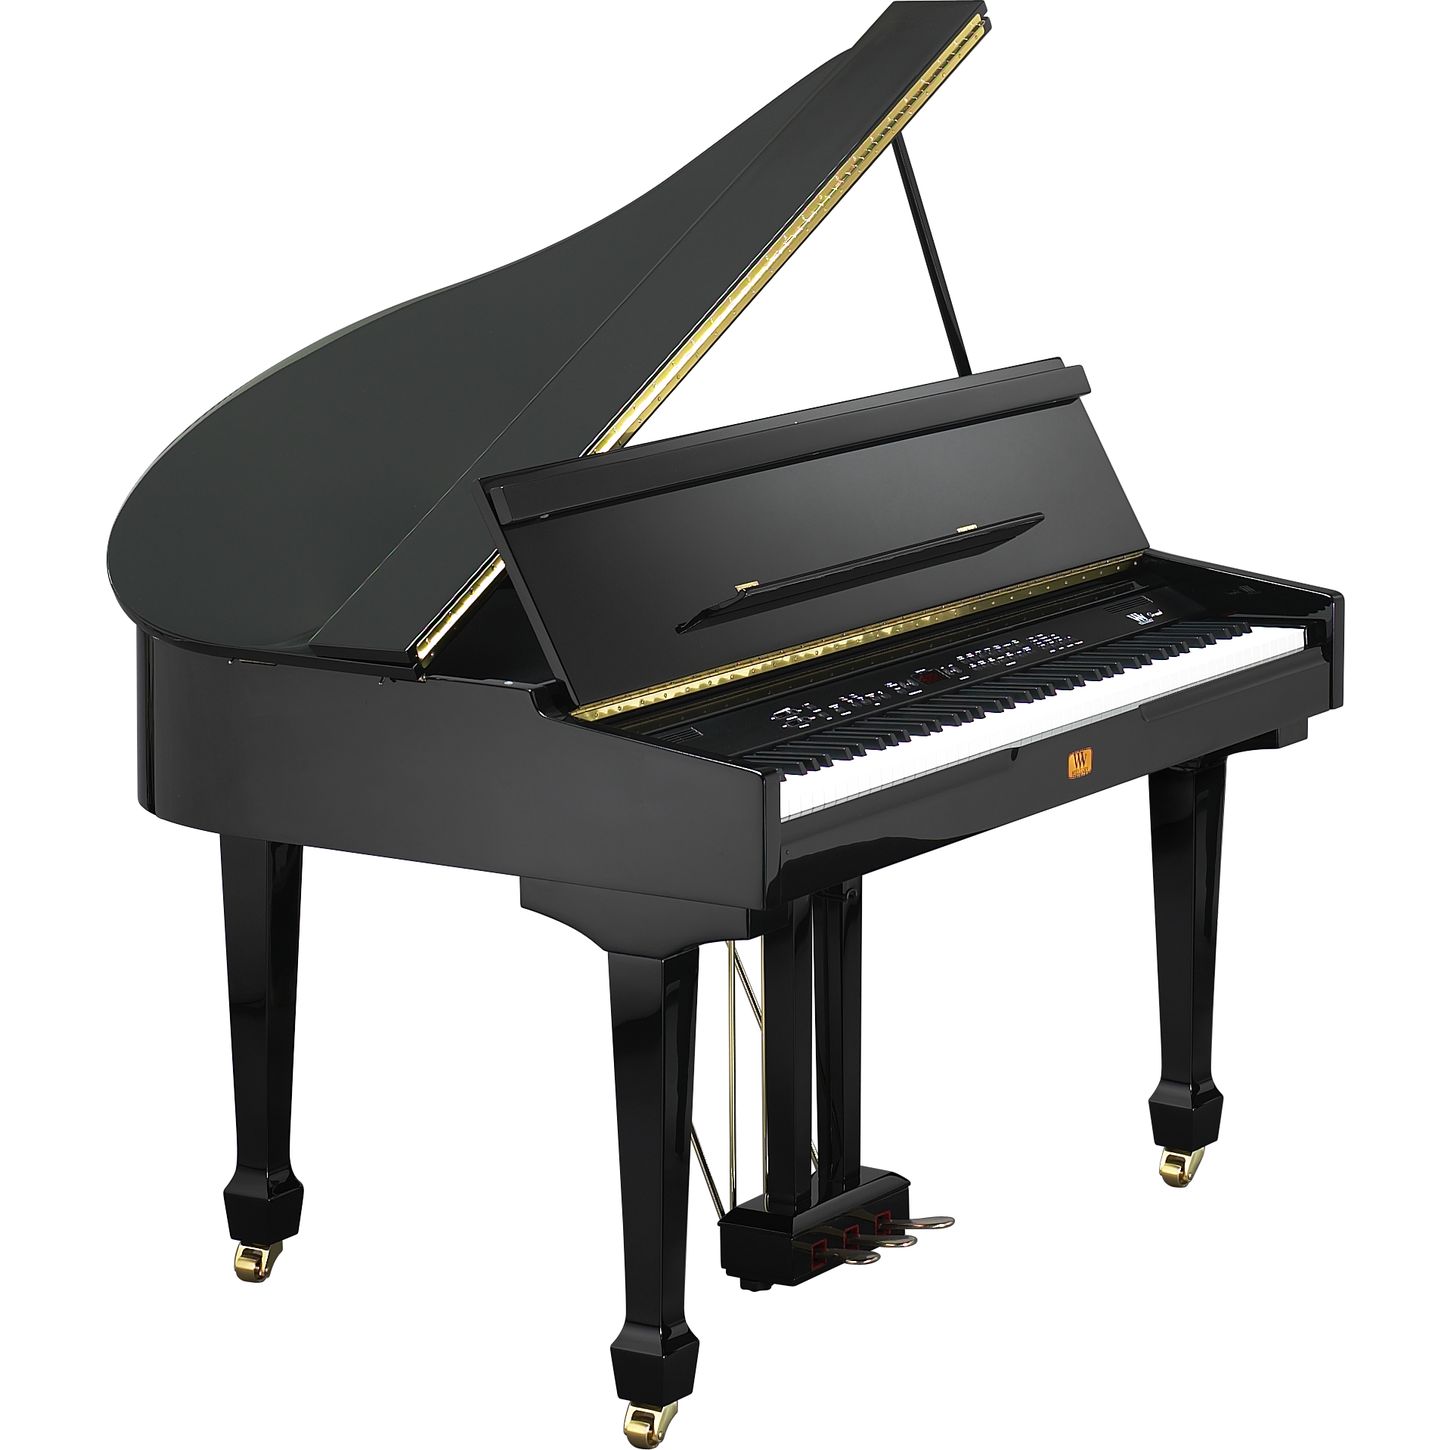 Black Grand Piano Top Image Pictures Becuo